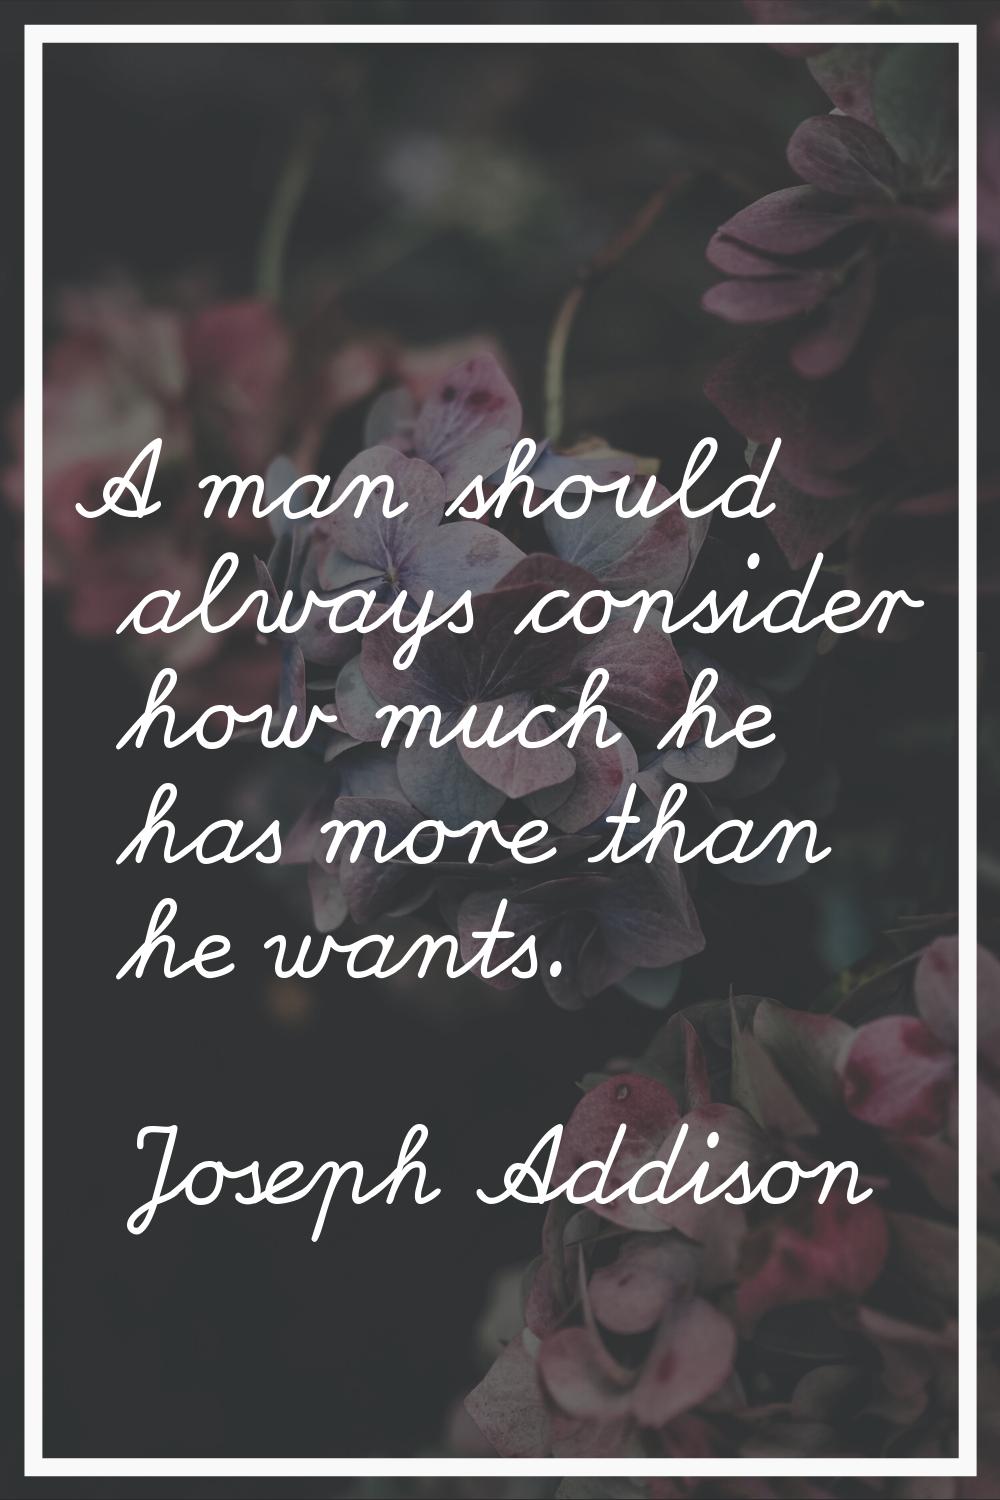 A man should always consider how much he has more than he wants.